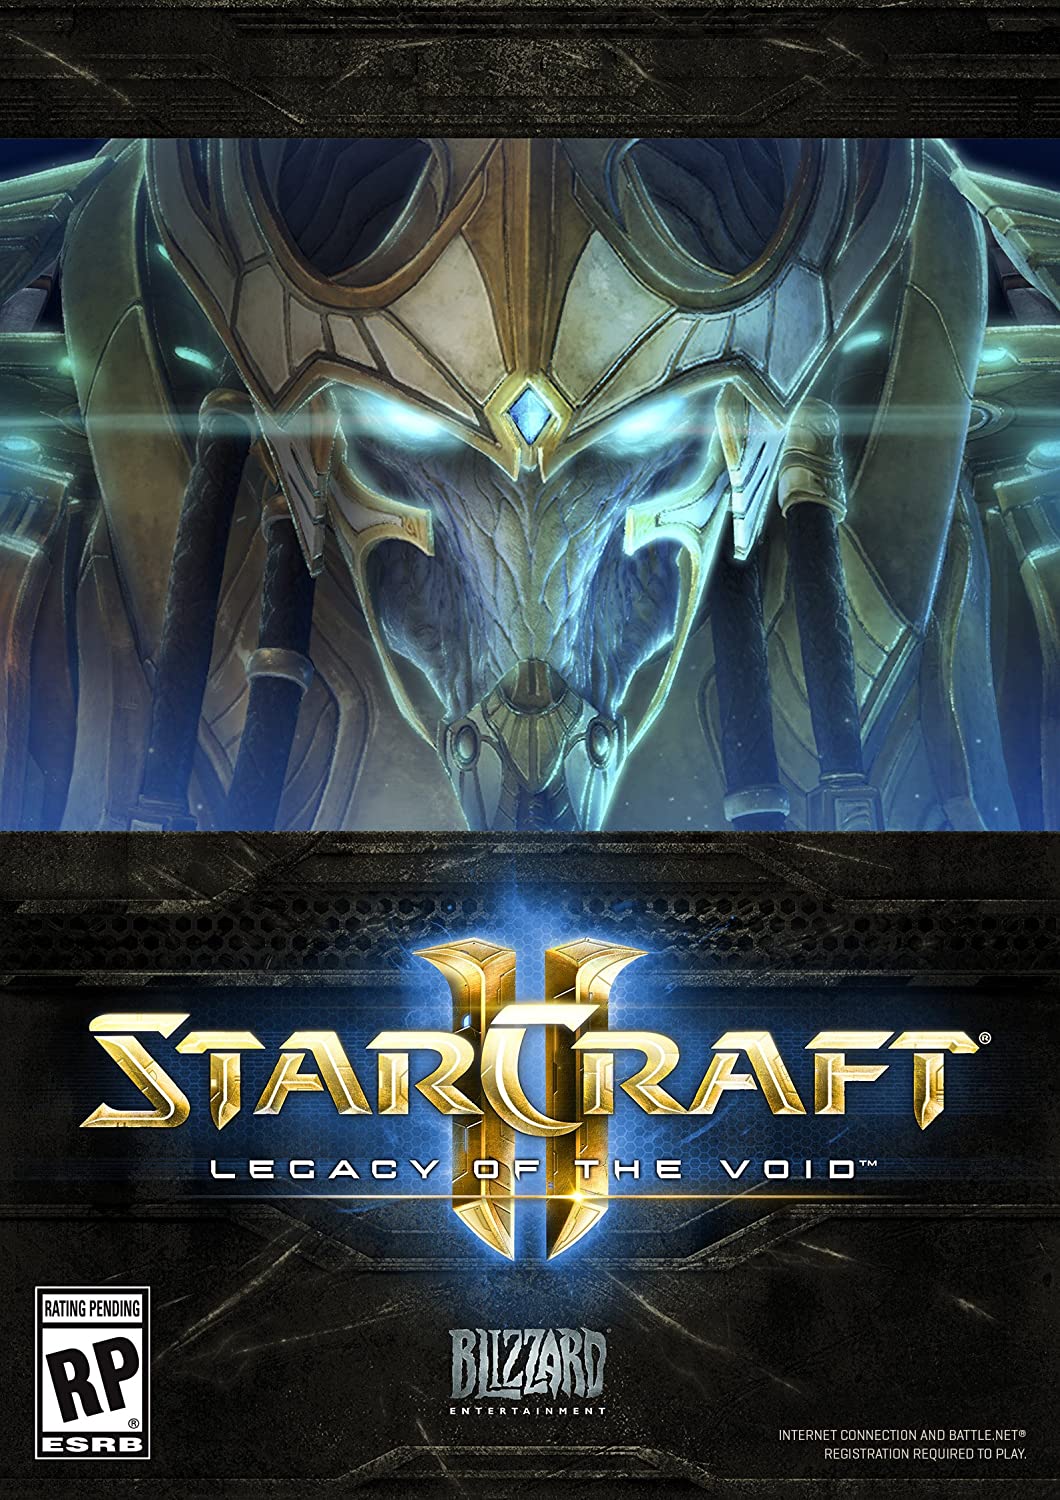 StarCraft II: Legacy of the Void player count stats